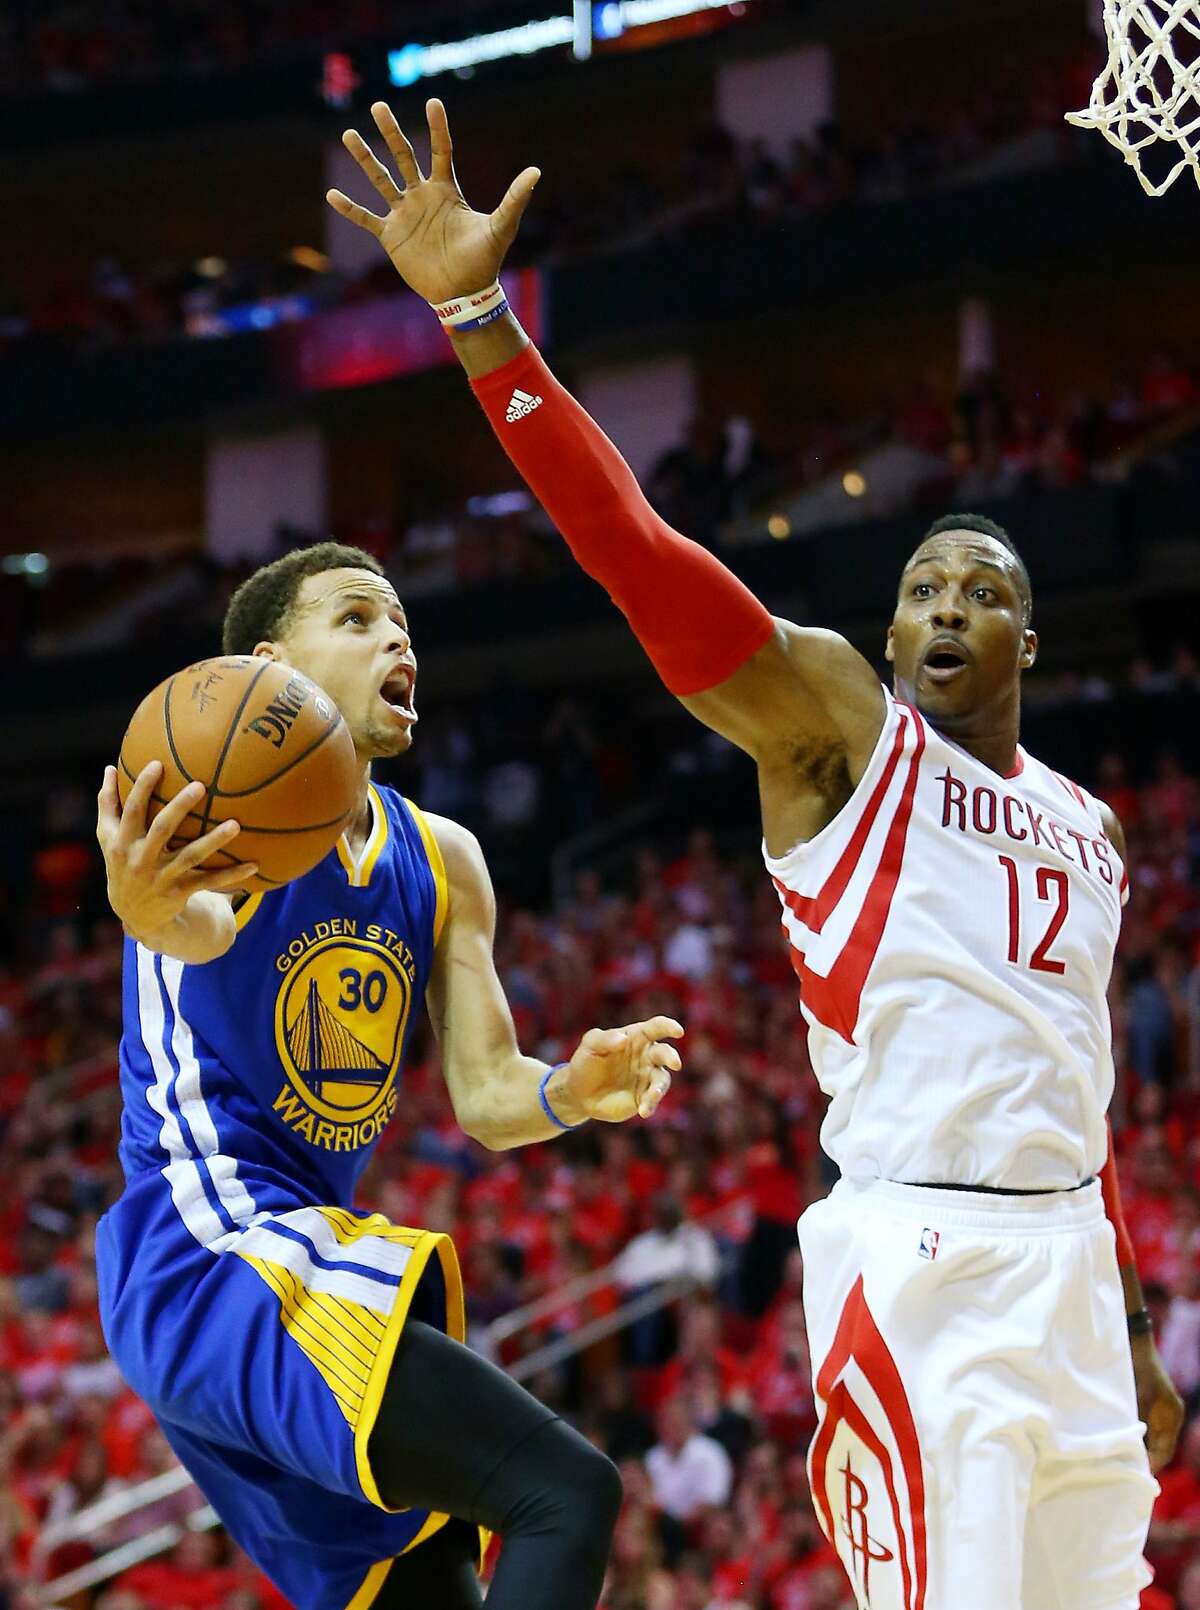 HOUSTON, TX - MAY 25: Stephen Curry #30 of the Golden State Warriors goes up against Dwight Howard #12 of the Houston Rockets in the fourth quarter during Game Four of the Western Conference Finals of the 2015 NBA Playoffs at Toyota Center on May 25, 2015 in Houston, Texas. NOTE TO USER: User expressly acknowledges and agrees that, by downloading and or using this photograph, user is consenting to the terms and conditions of Getty Images License Agreement. (Photo by Ronald Martinez/Getty Images)